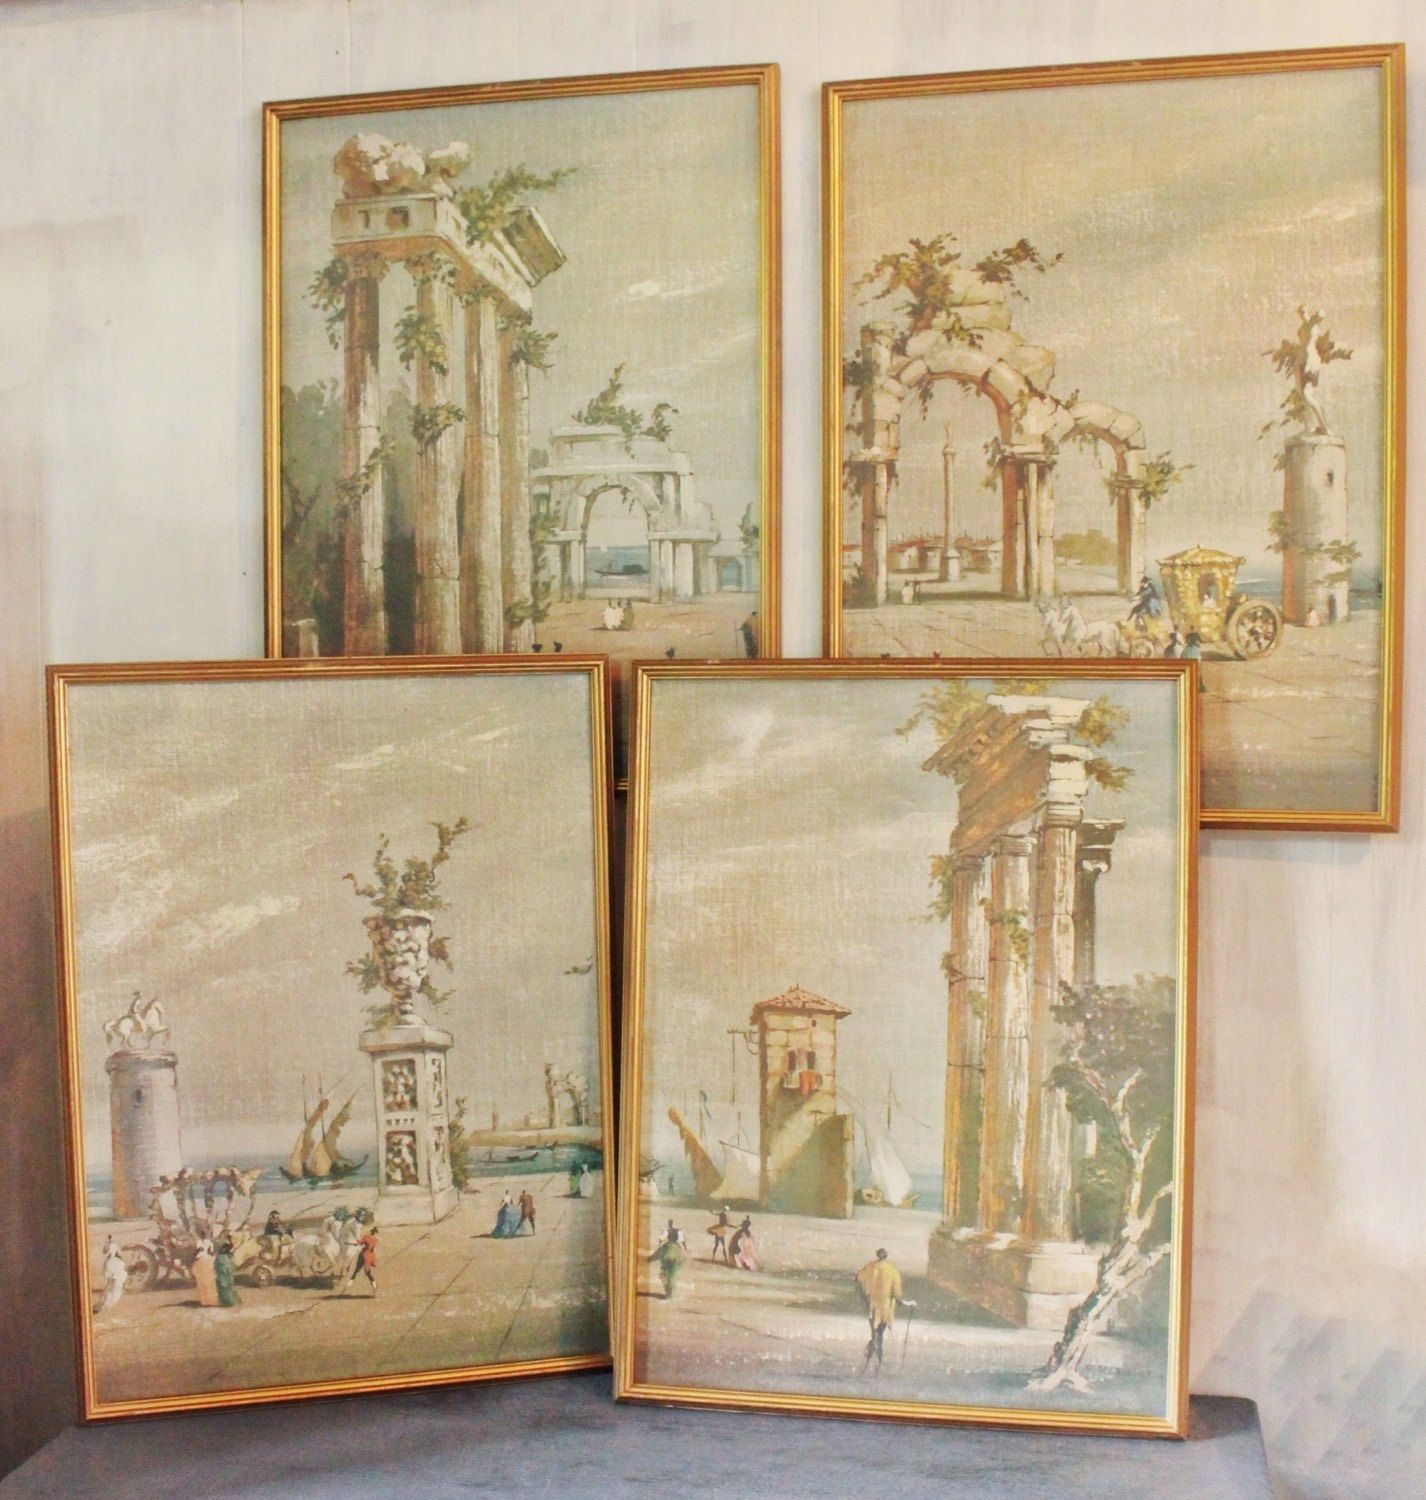 Large Framed Lithographs 1950s Italian Style Wall Decor Throughout Most Recent Italy Framed Art Prints (View 1 of 20)